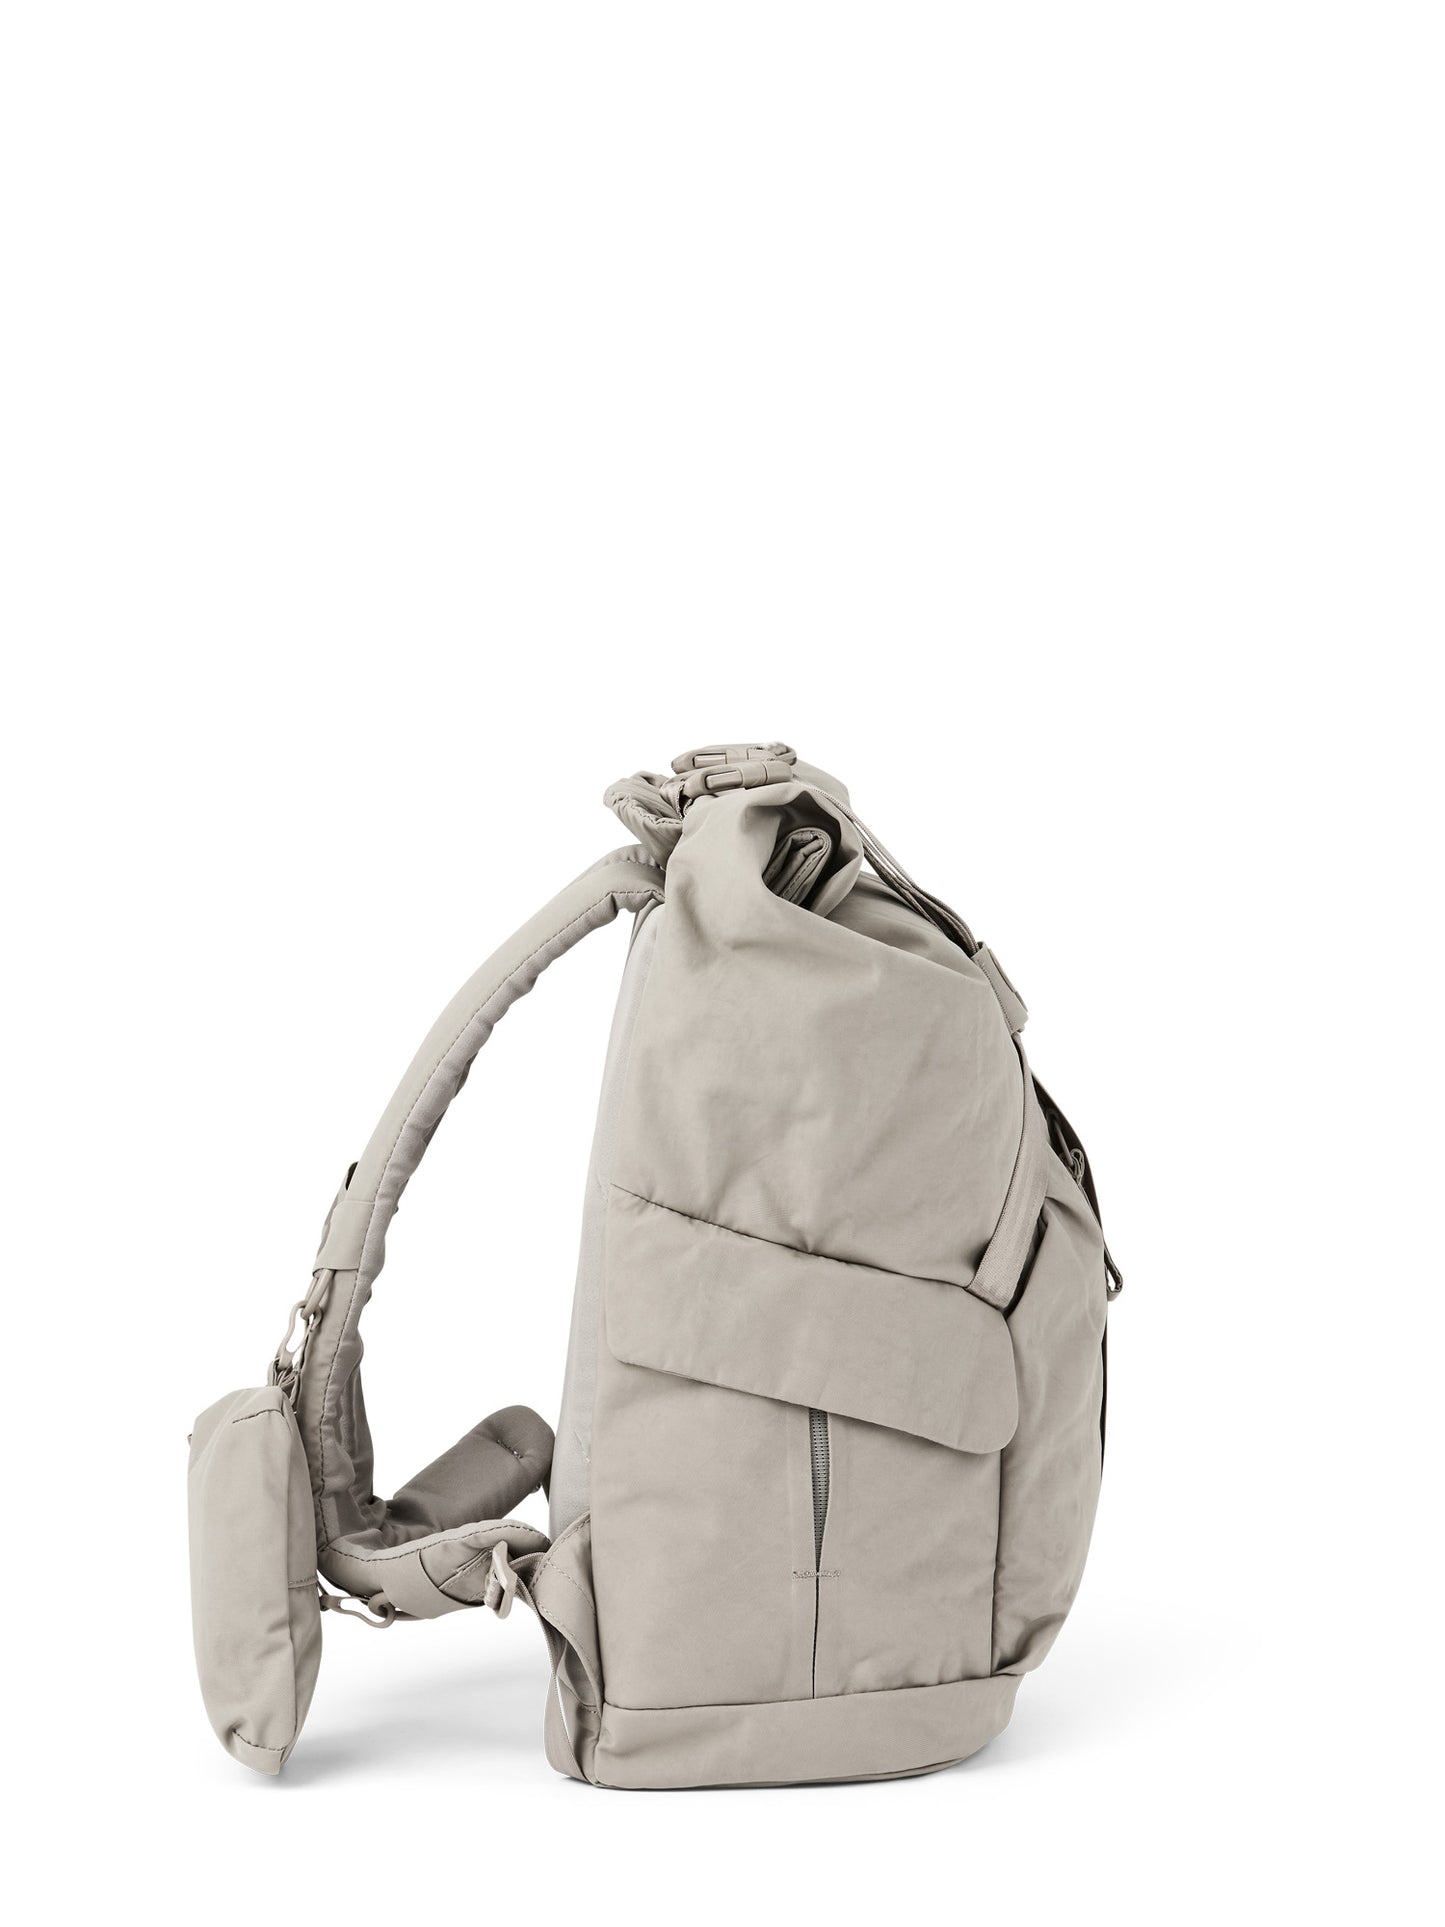 pinqponq-backpack-Kross-Crinkle-Taupe-side